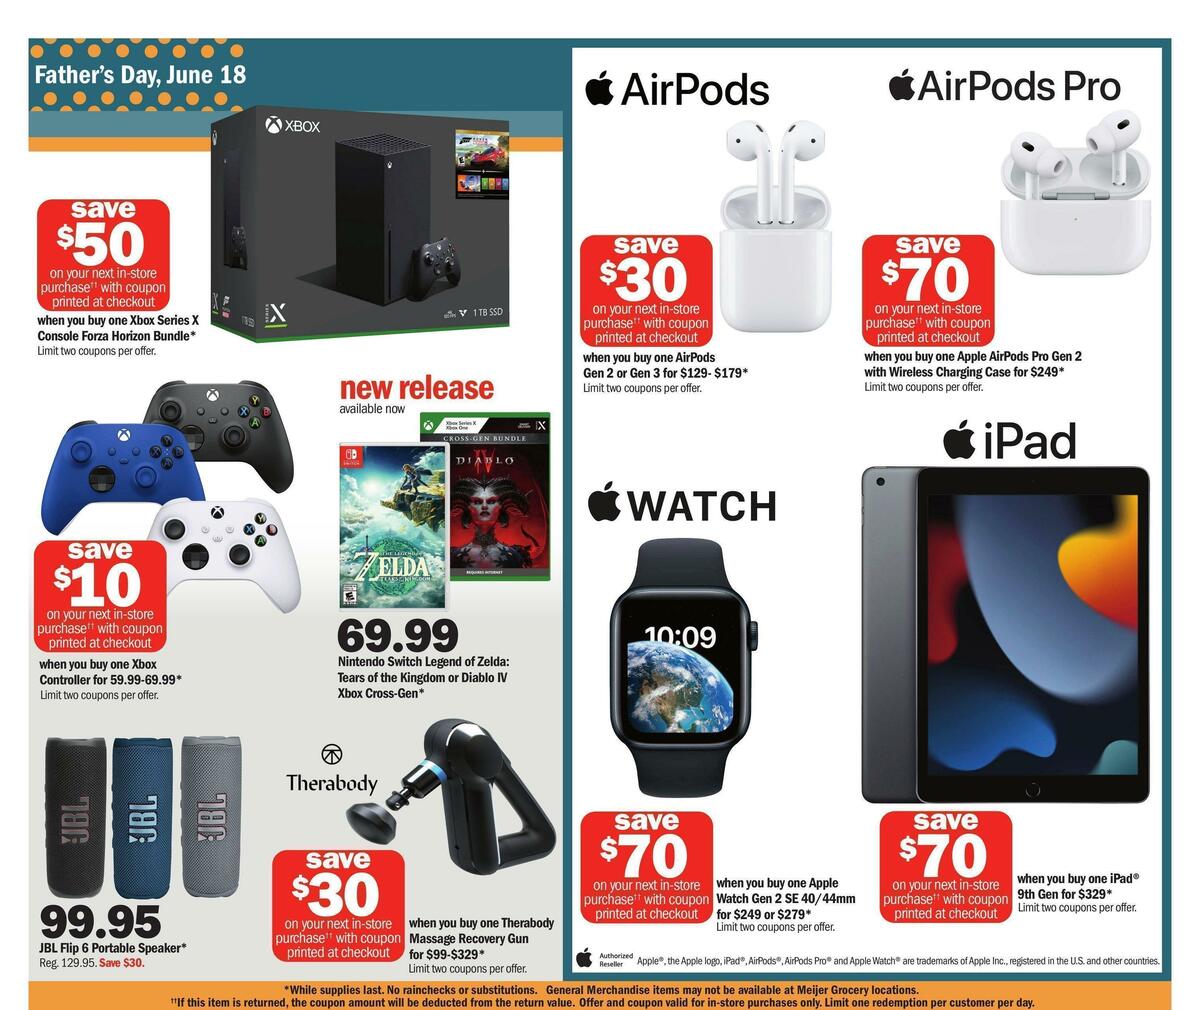 Meijer Father's Day Weekly Ad from June 11